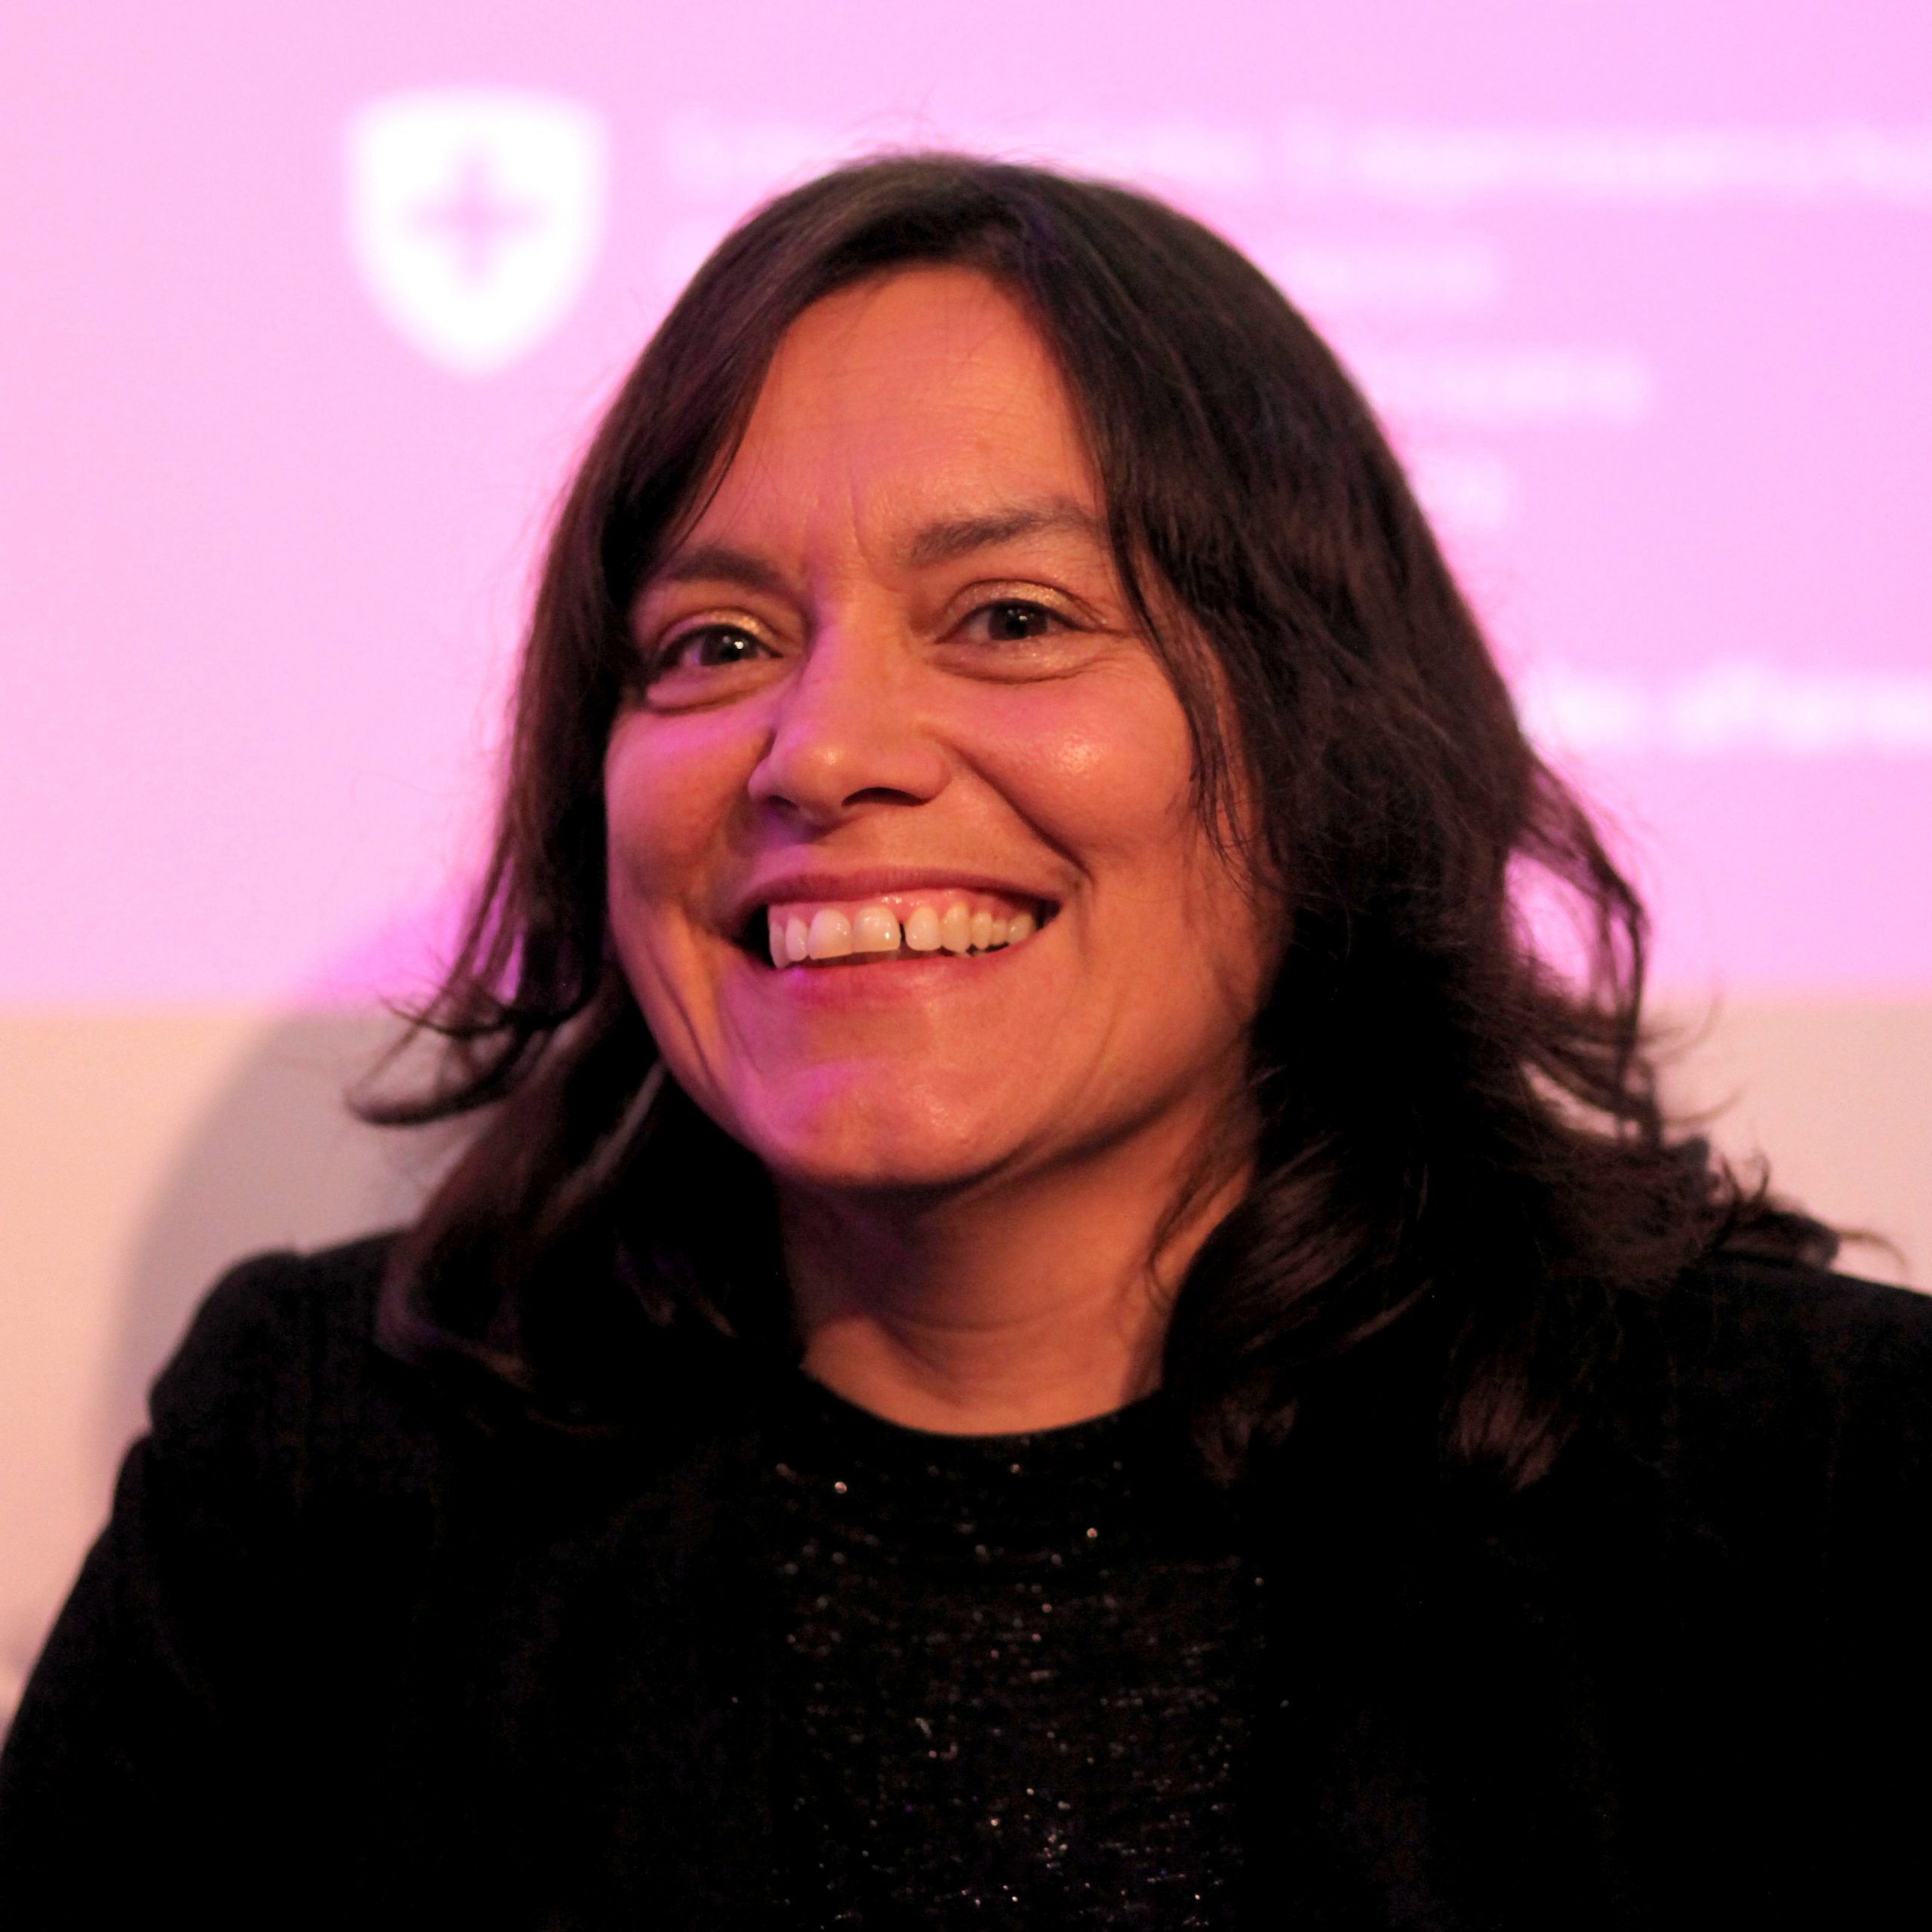 A photograph of author Sara Ahmed smiling.